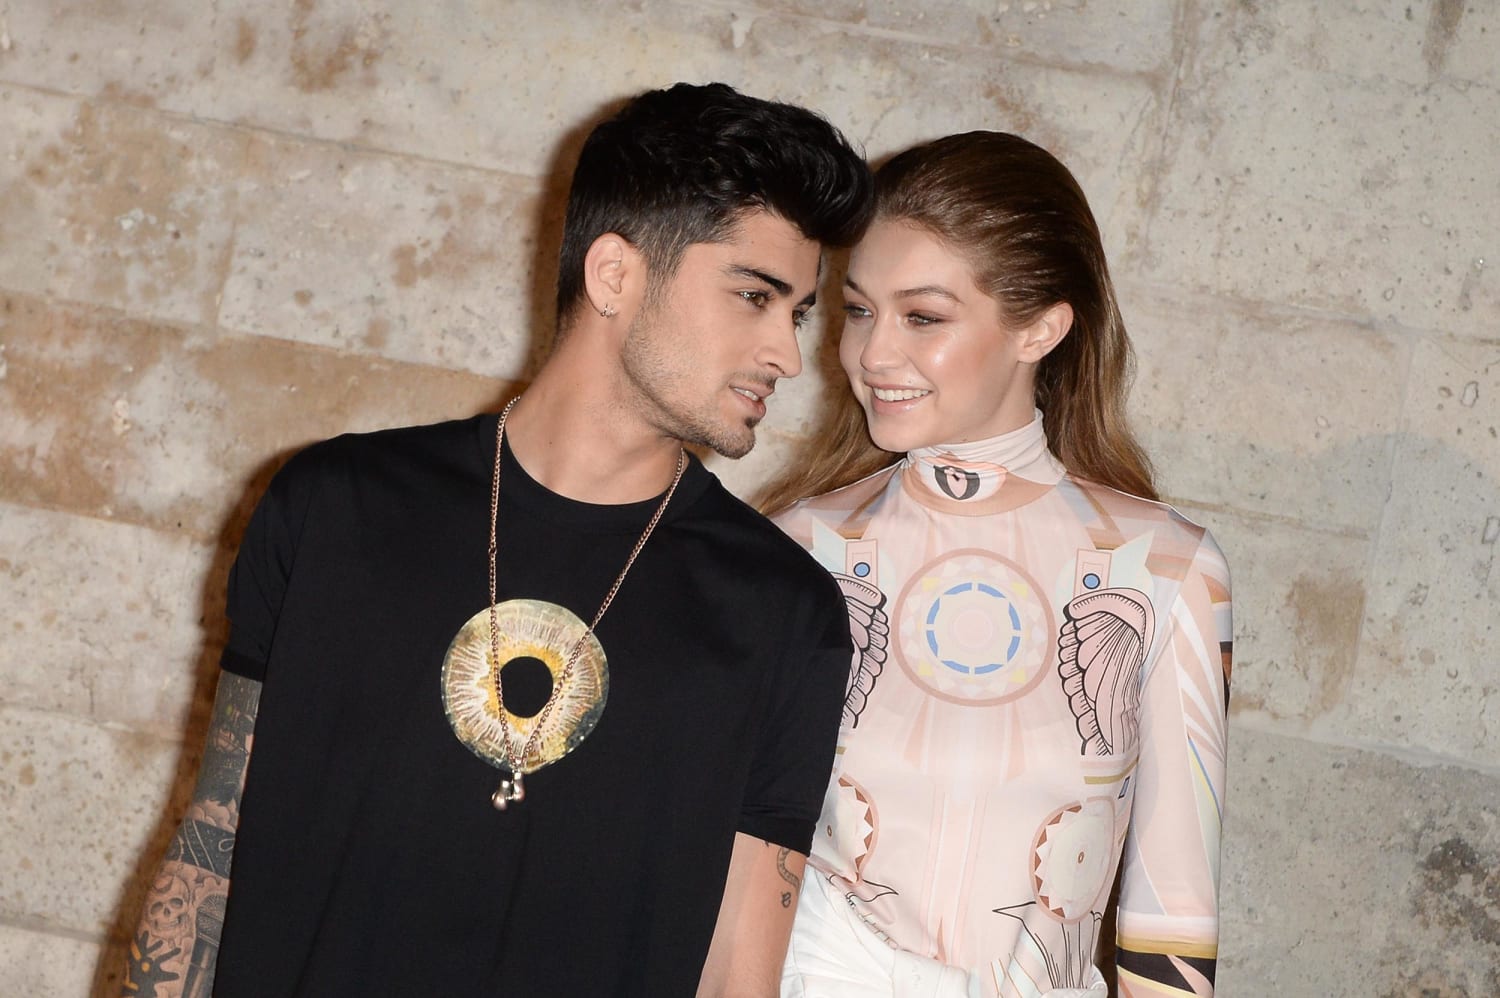 Zayn Malik Opens Up About Daughter With Gigi Hadid On 'Call Her Daddy'